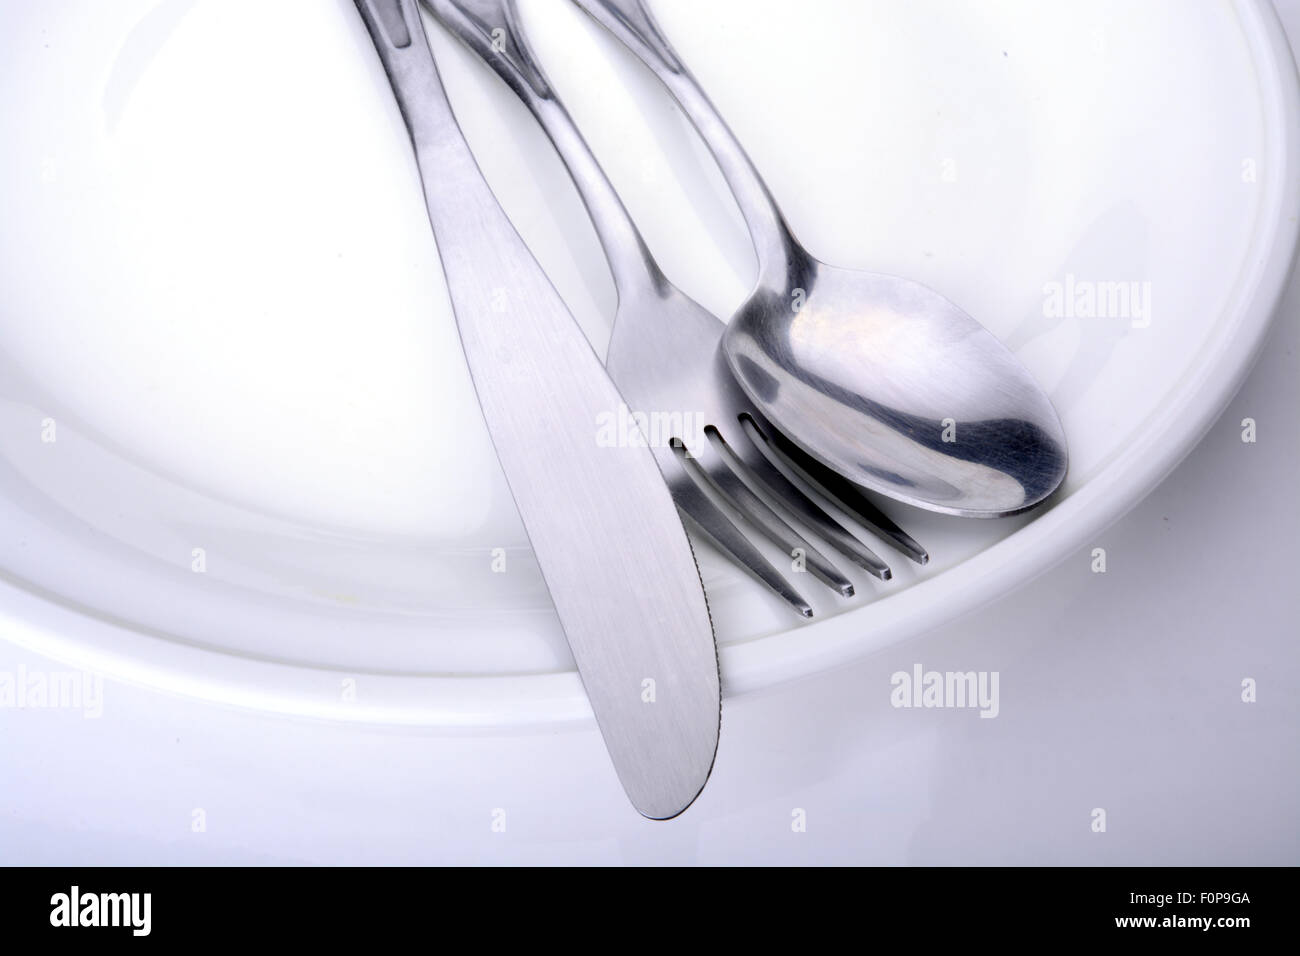 Macro shot of a white plate with utensils on it Stock Photo